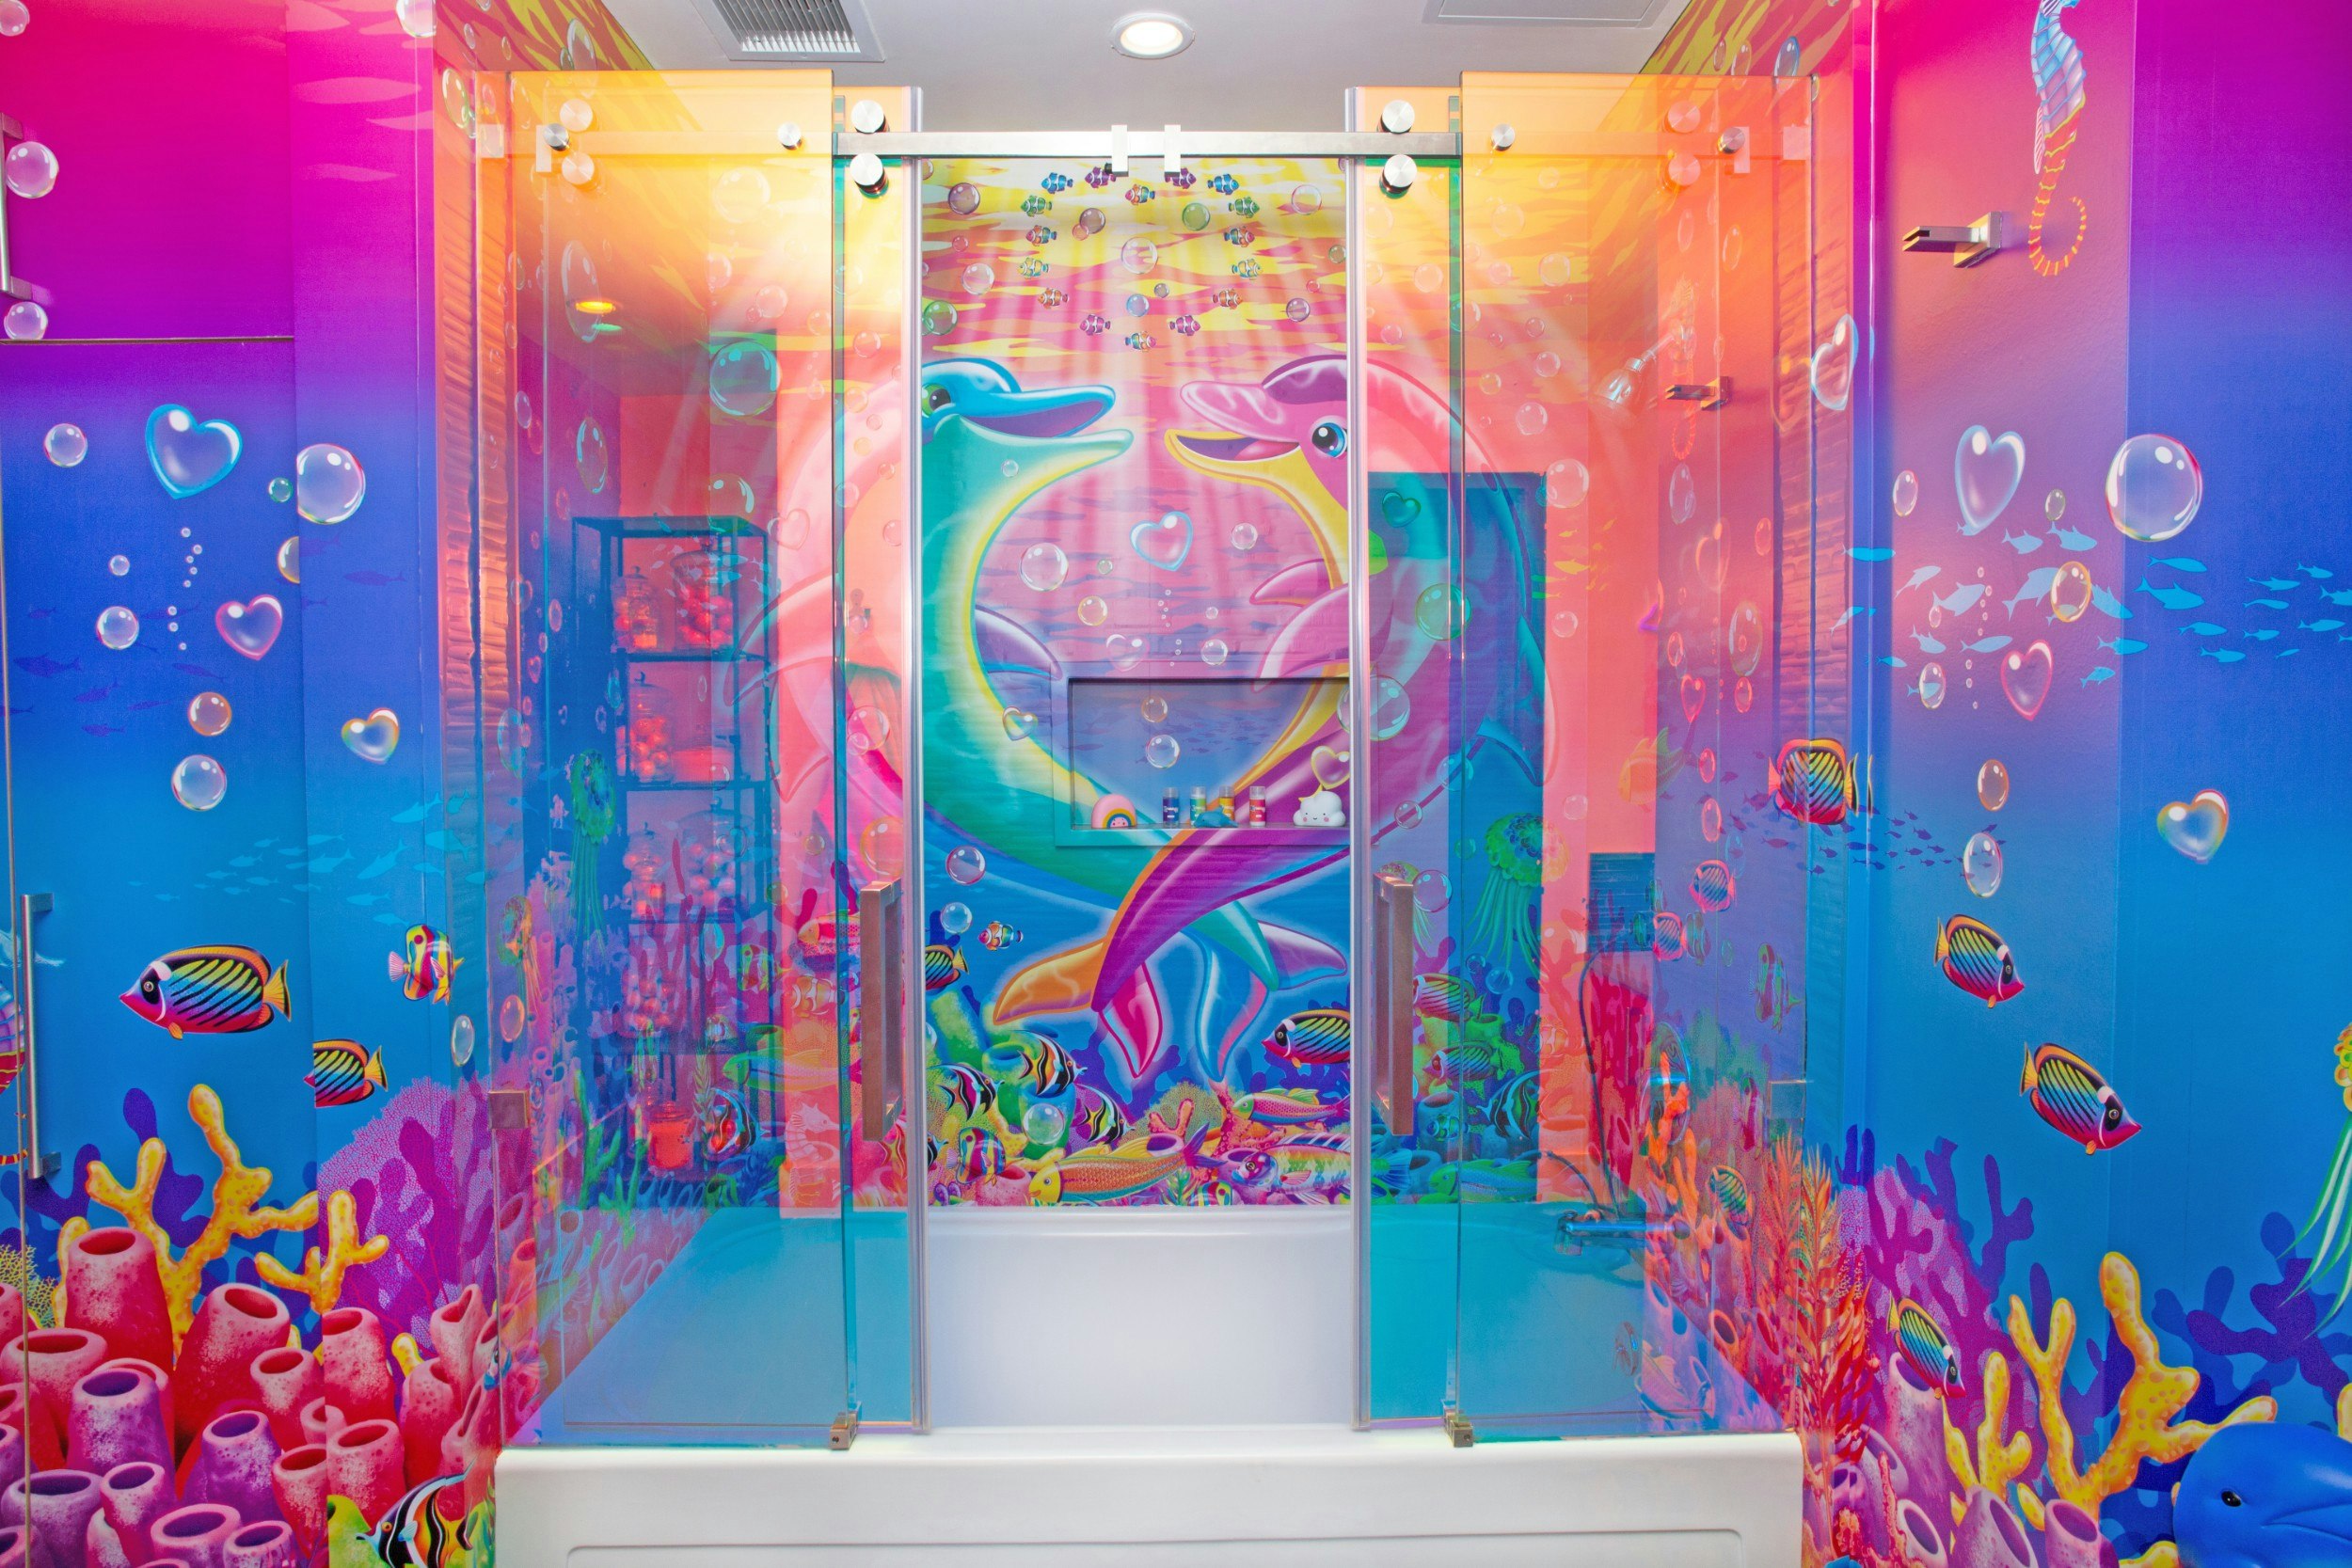 The bathroom  with underwater scene mural at the Lisa Frank Flat in Los Angeles